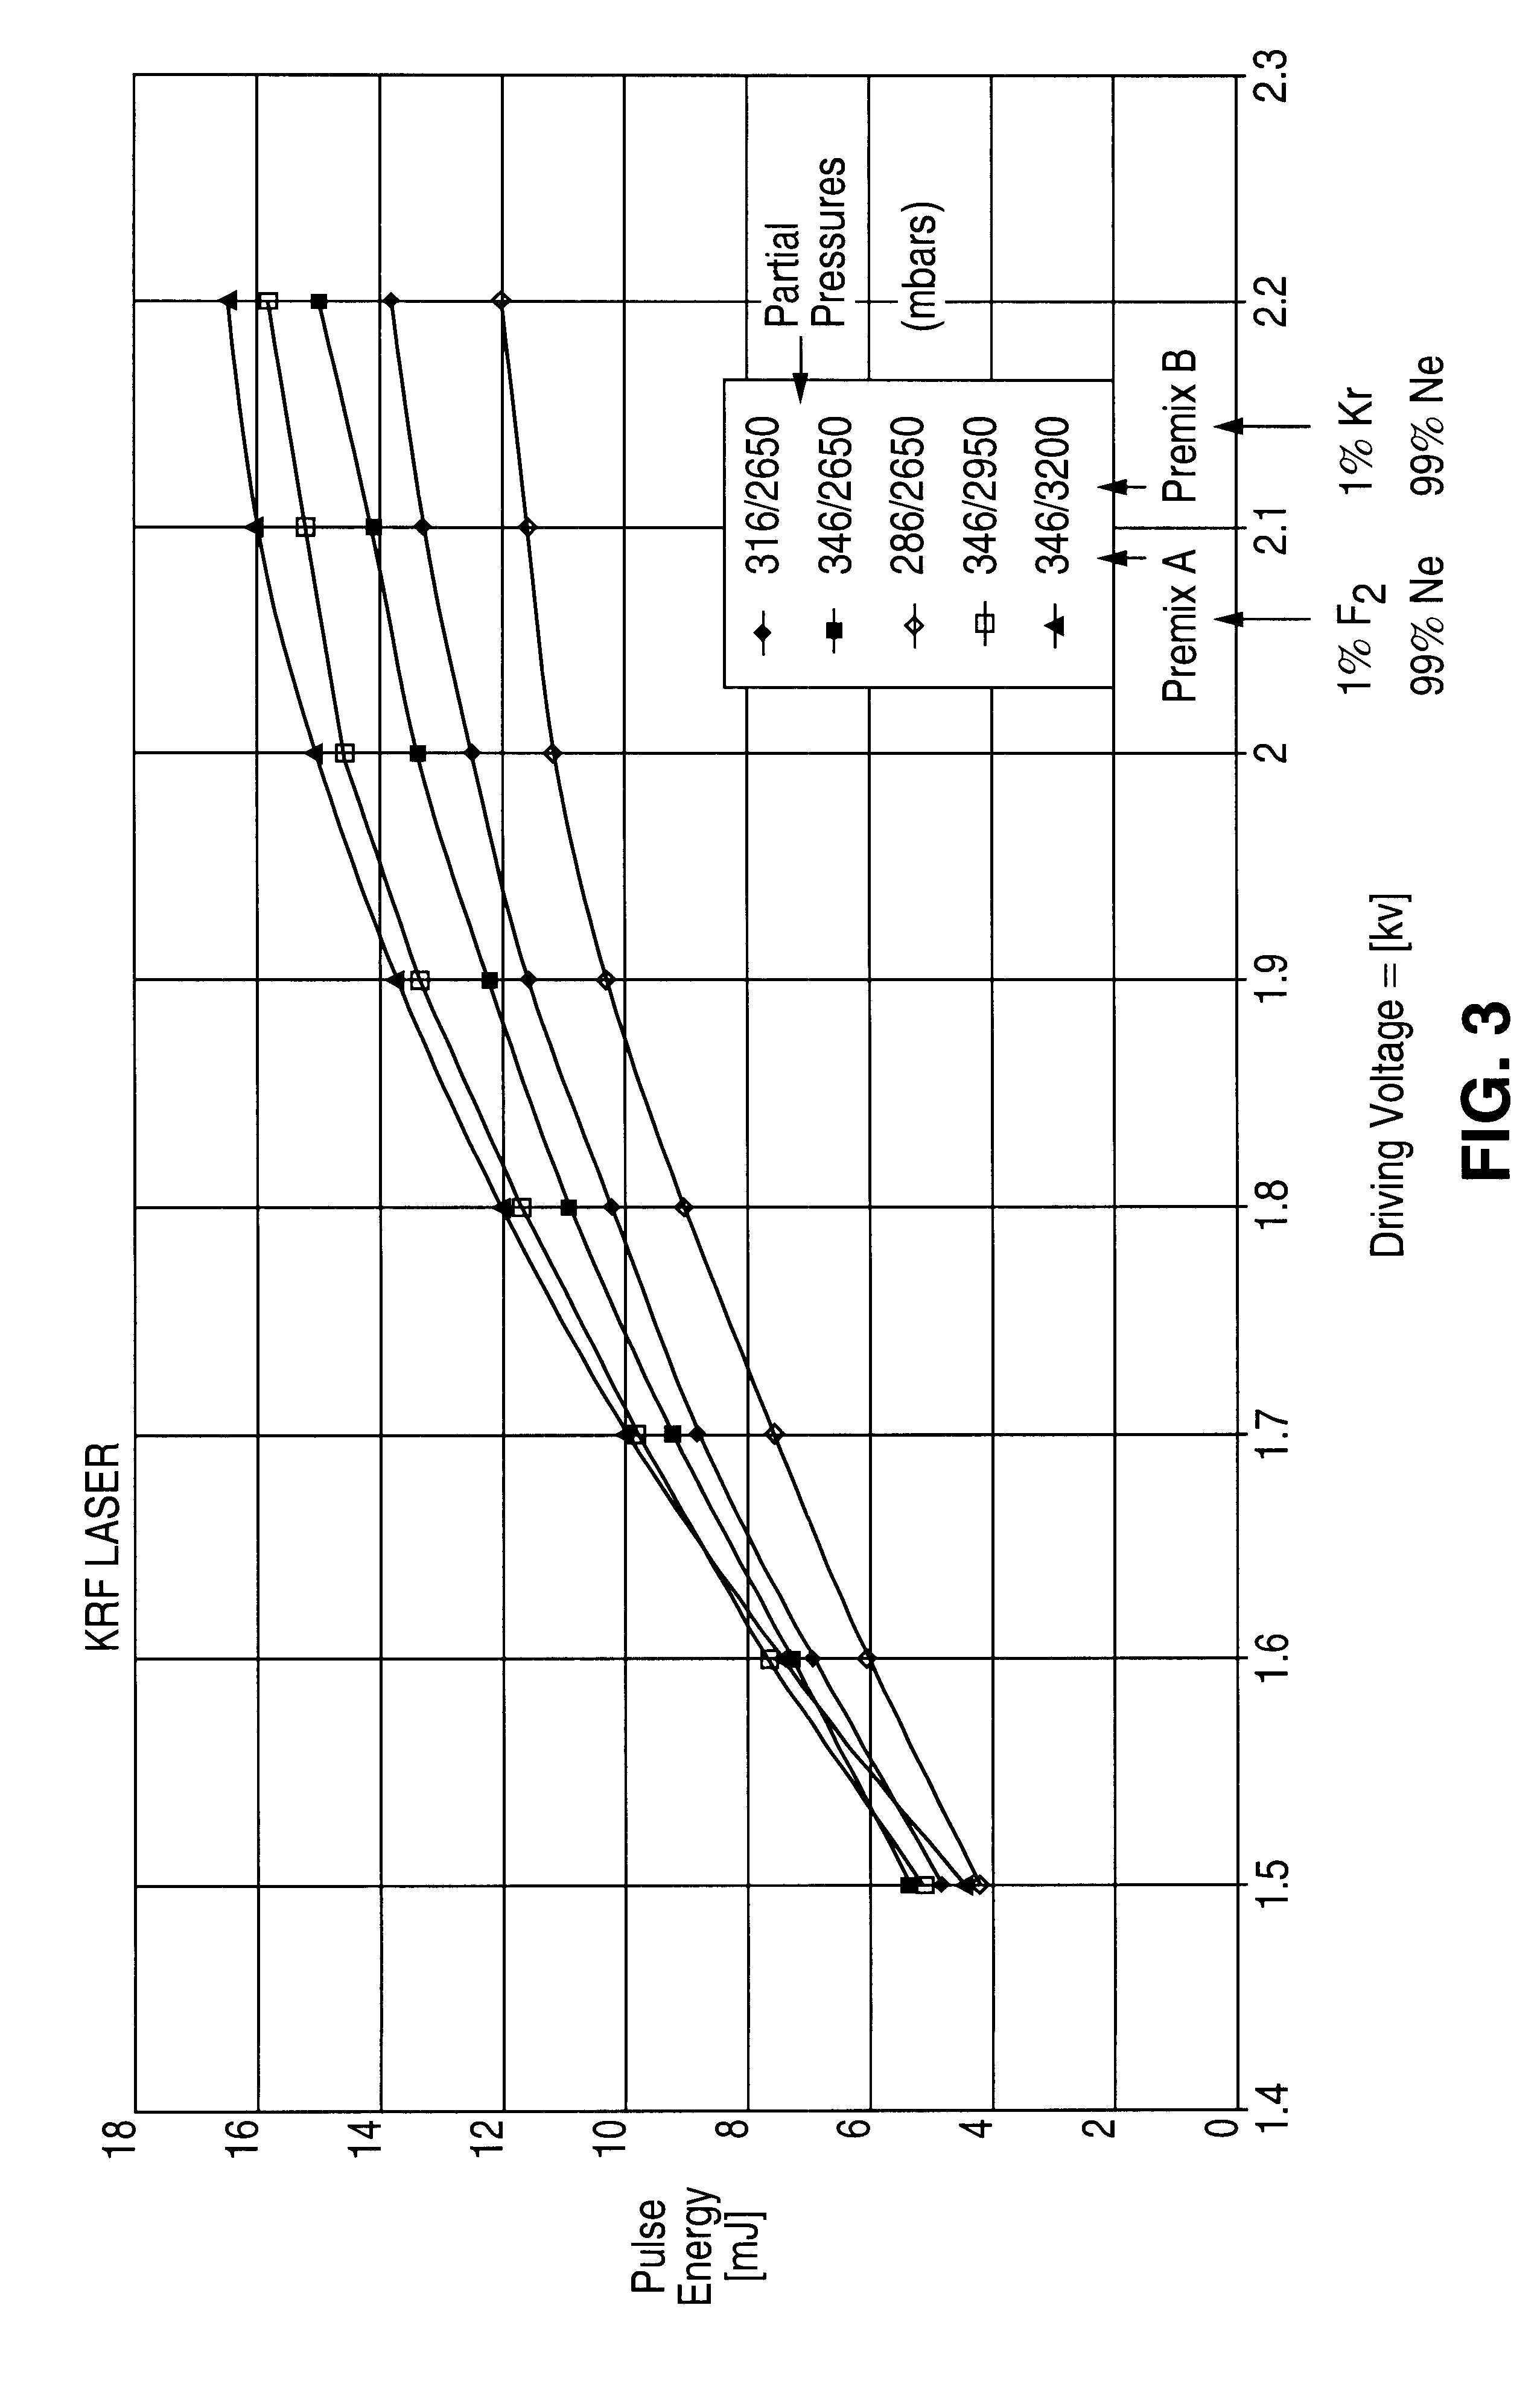 Method and procedure to automatically stabilize excimer laser output parameters